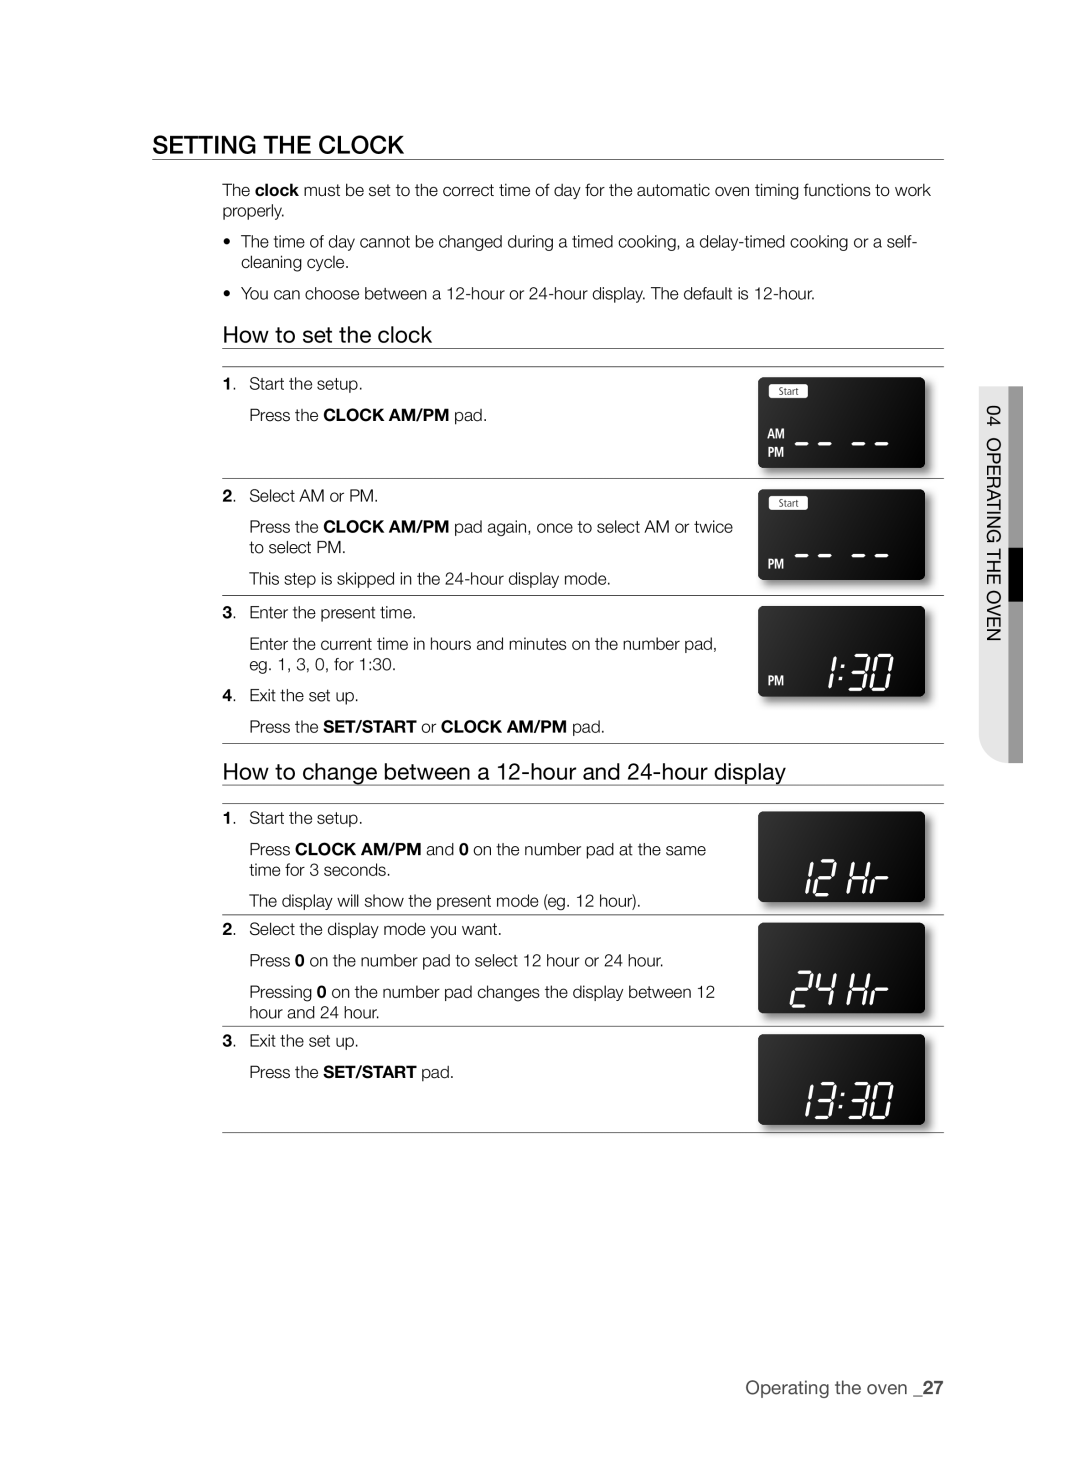 Samsung FE-R500WW user manual Setting the clock, How to set the clock, How to change between a 12-hour and 24-hour display 